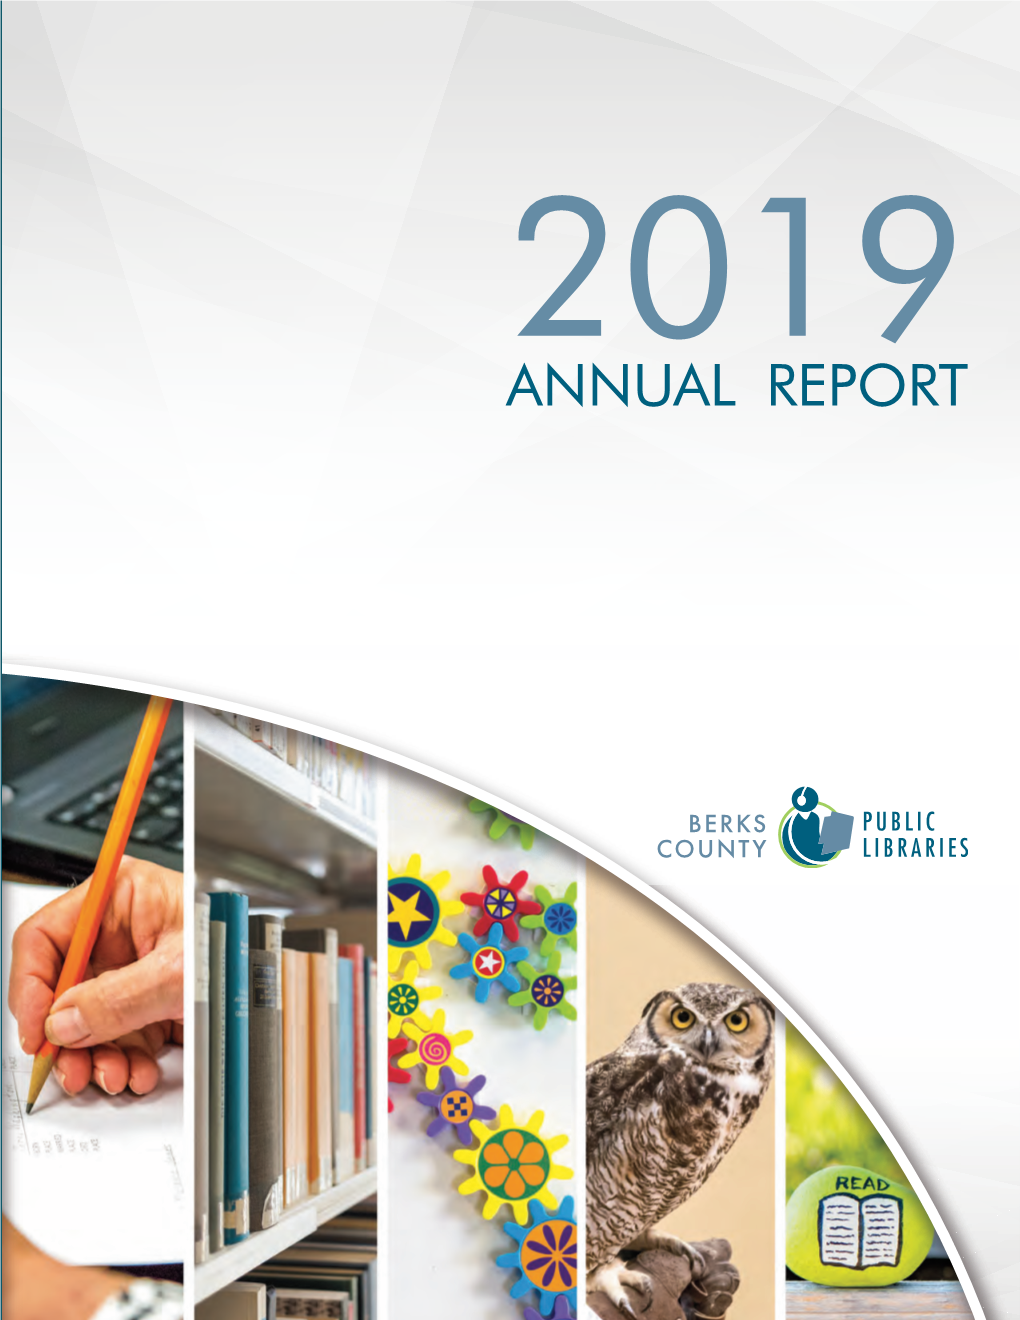 ANNUAL REPORT RESEARCH Discover More with TOOLS Library Databases